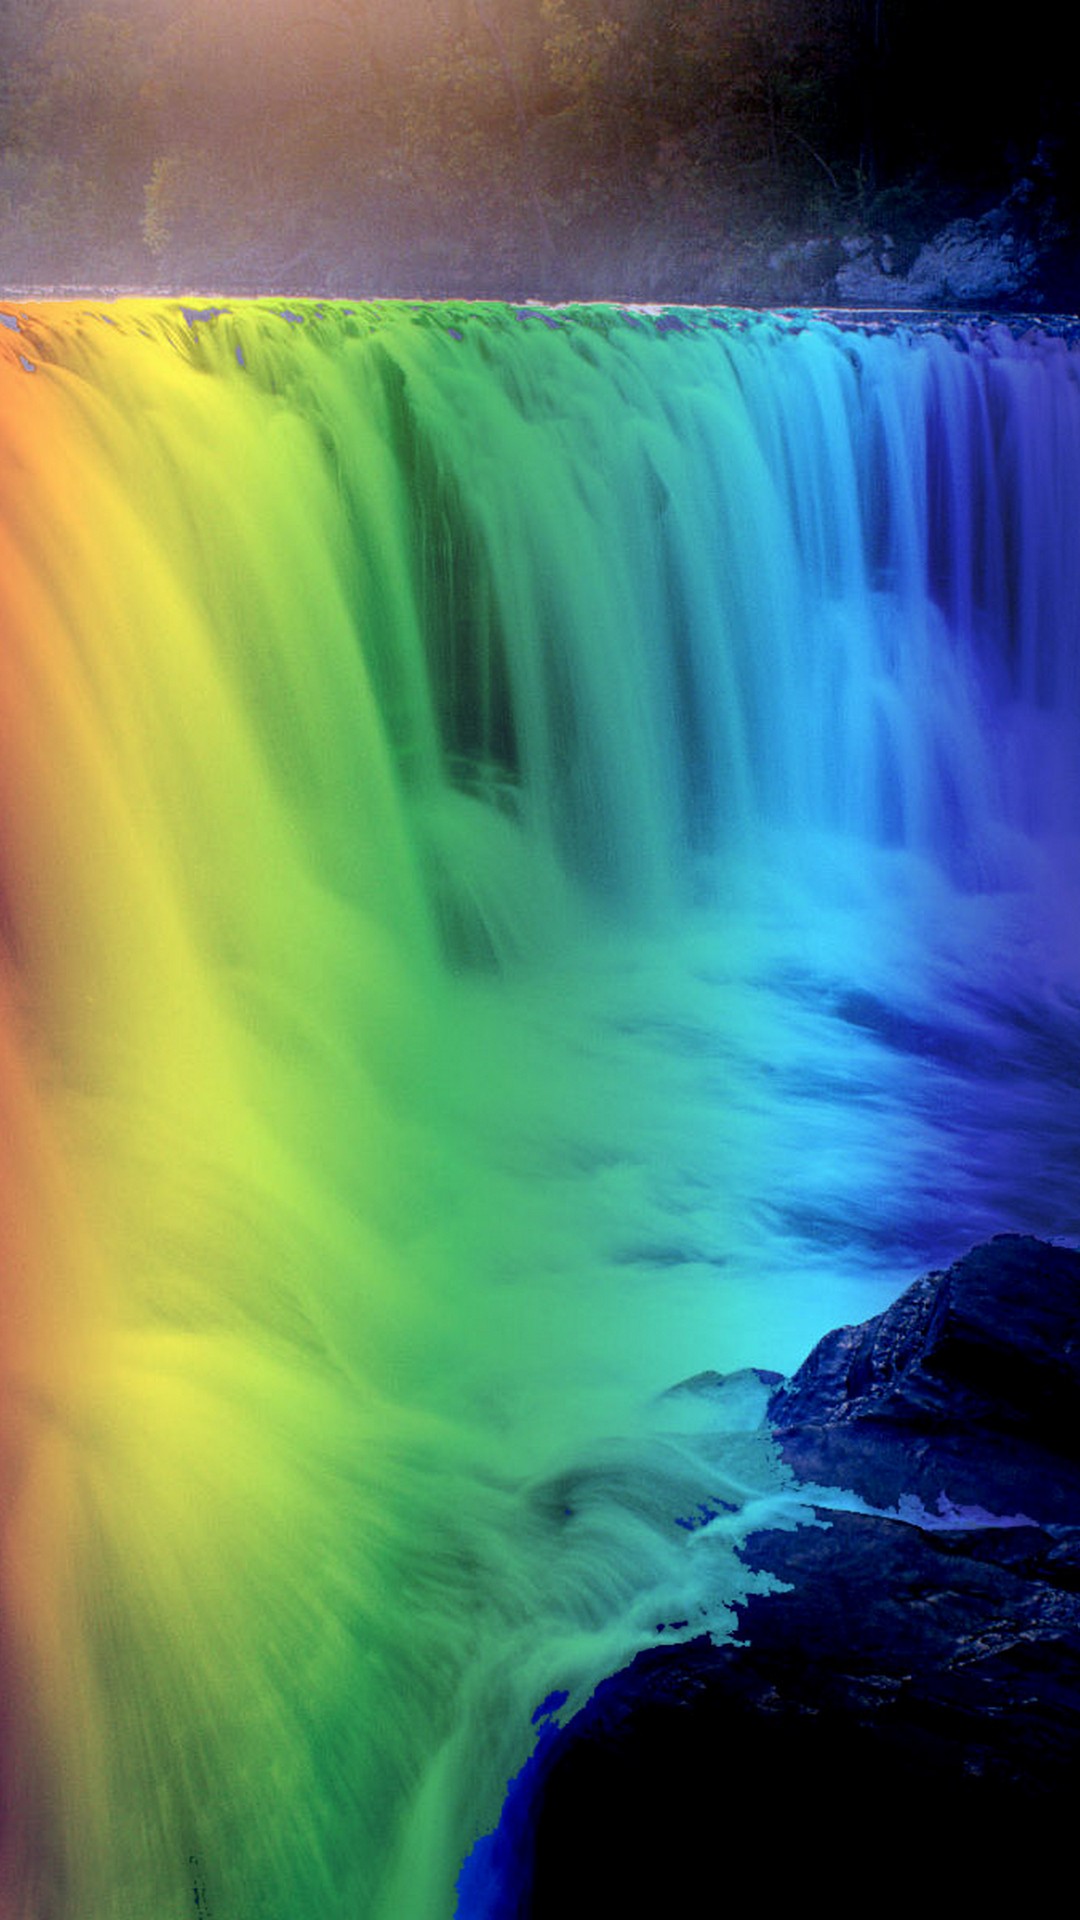 Rainbow Android Wallpaper with image resolution 1080x1920 pixel. You can make this wallpaper for your Android backgrounds, Tablet, Smartphones Screensavers and Mobile Phone Lock Screen